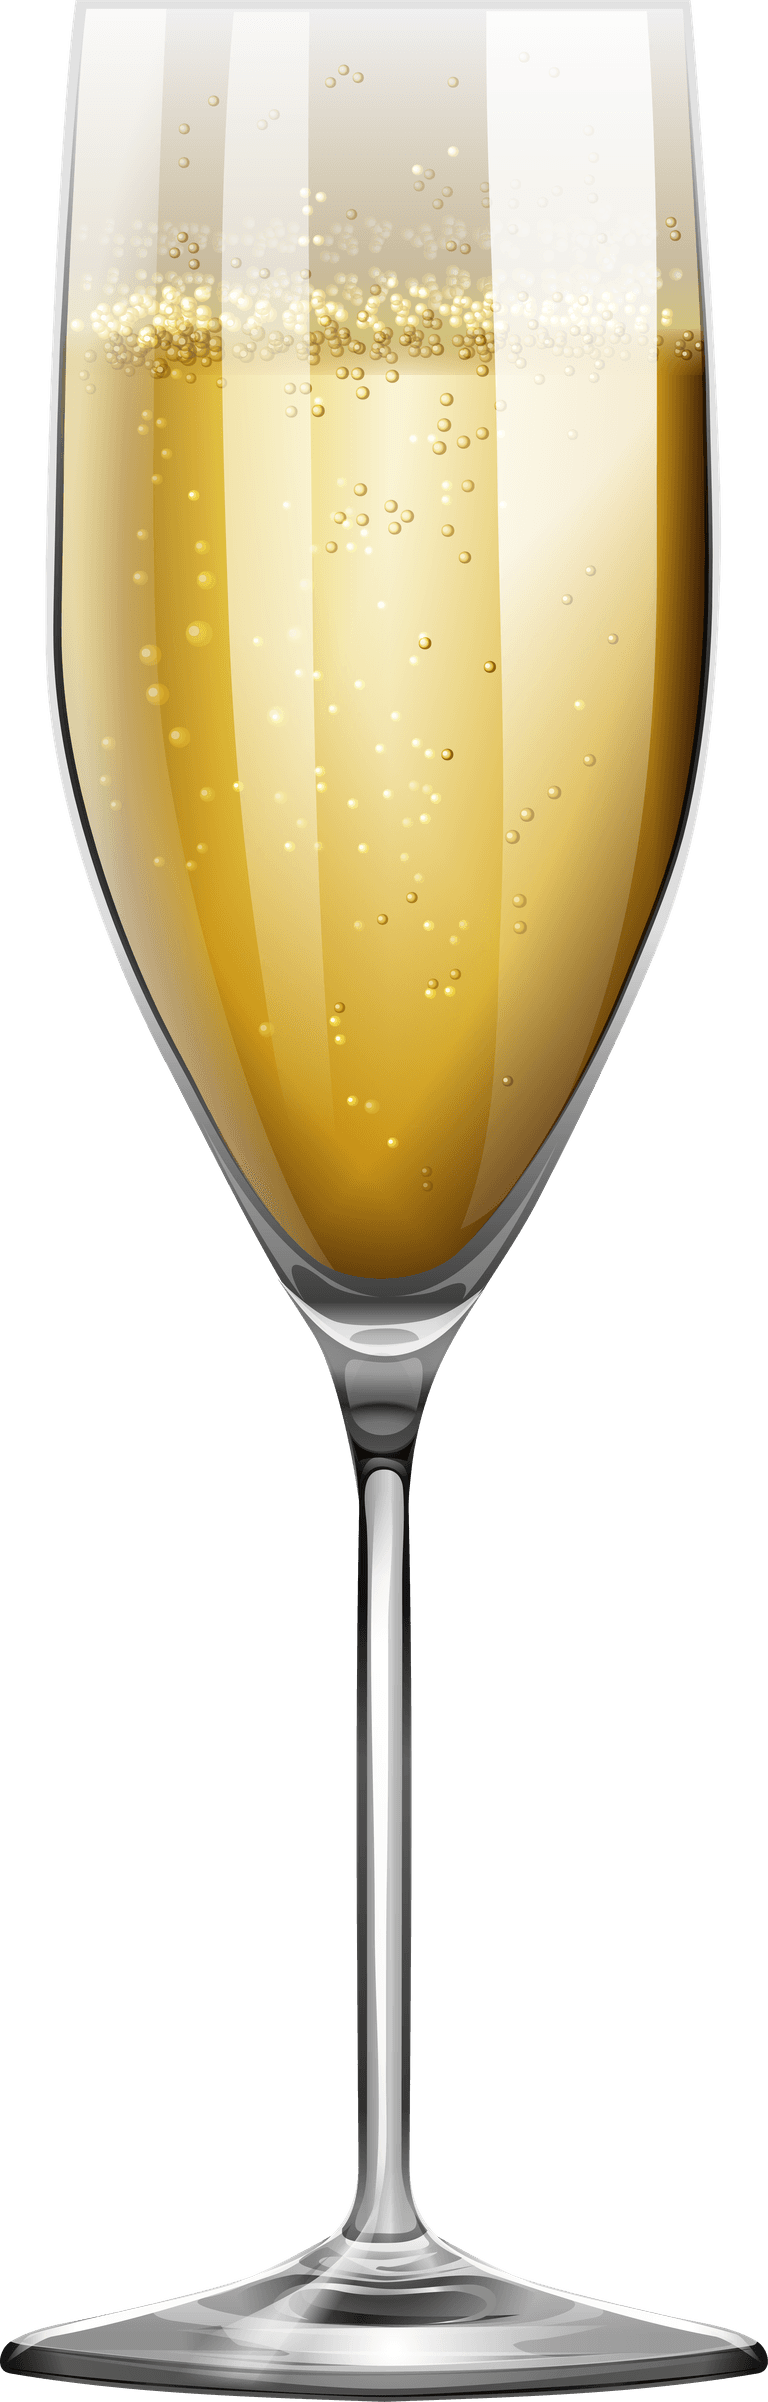 tall cup wine glasses filled with red and white wine illustration